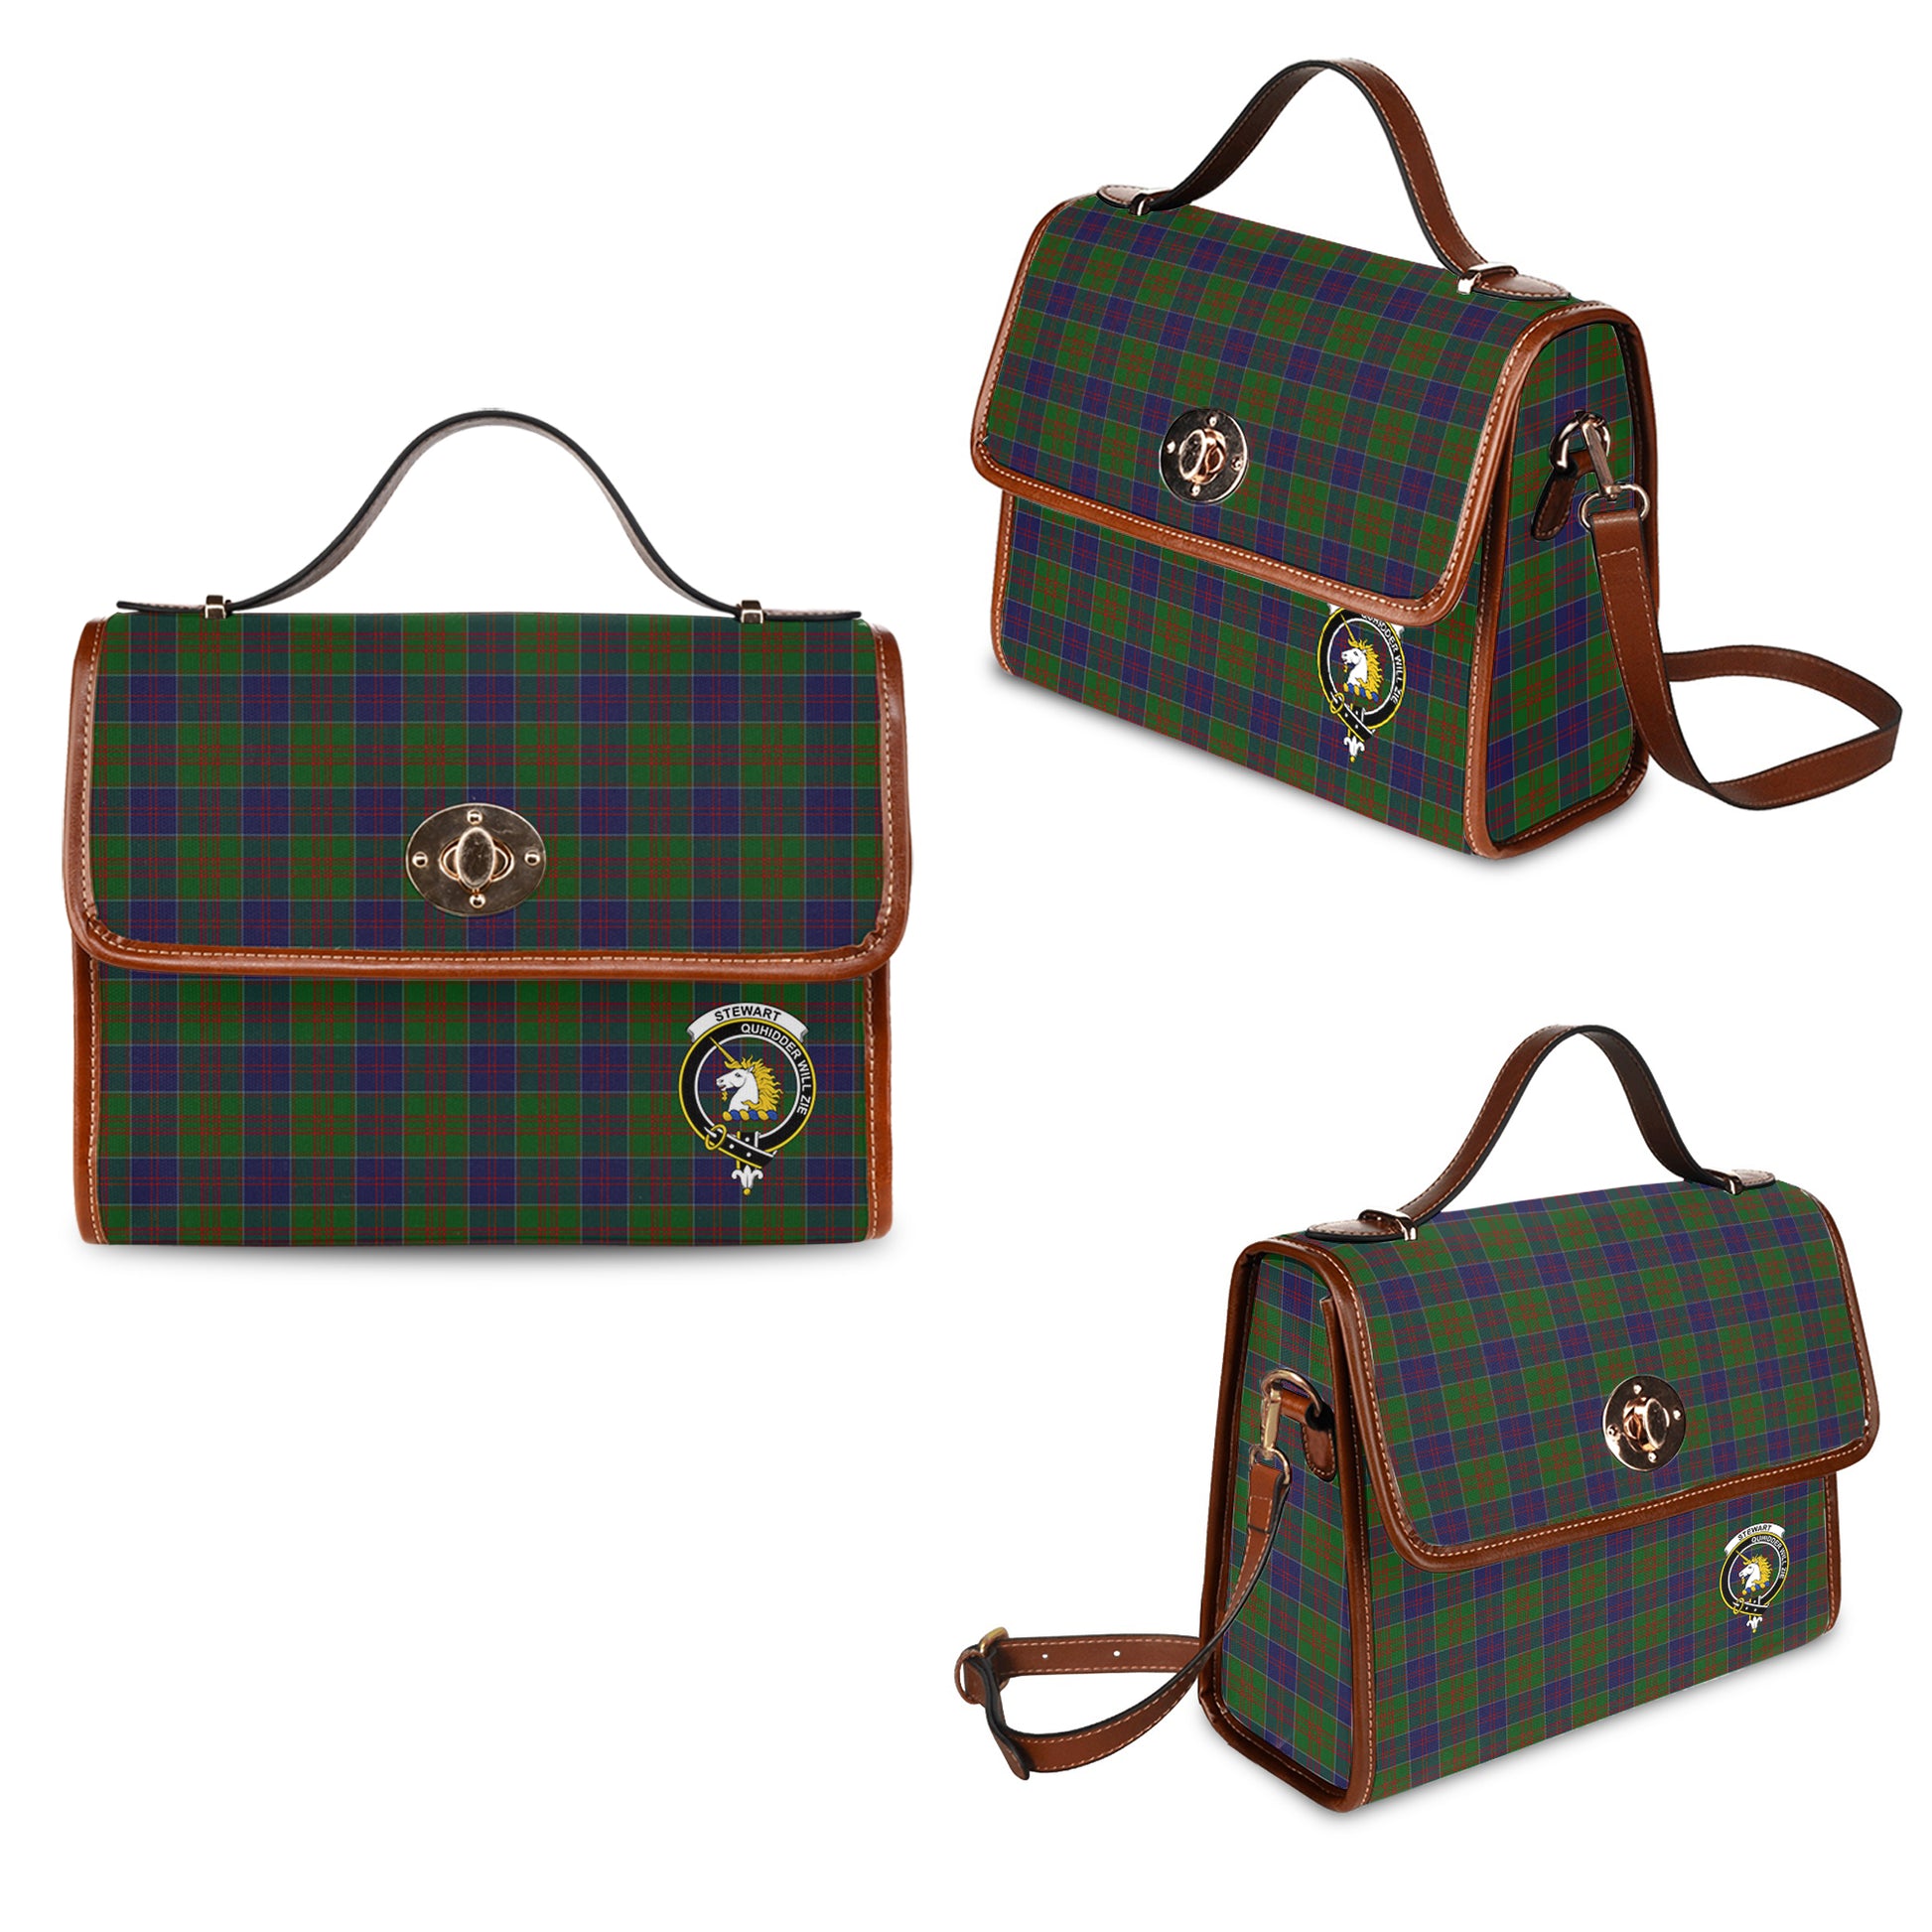 Stewart of Appin Hunting Tartan Leather Strap Waterproof Canvas Bag with Family Crest One Size 34cm * 42cm (13.4" x 16.5") - Tartanvibesclothing